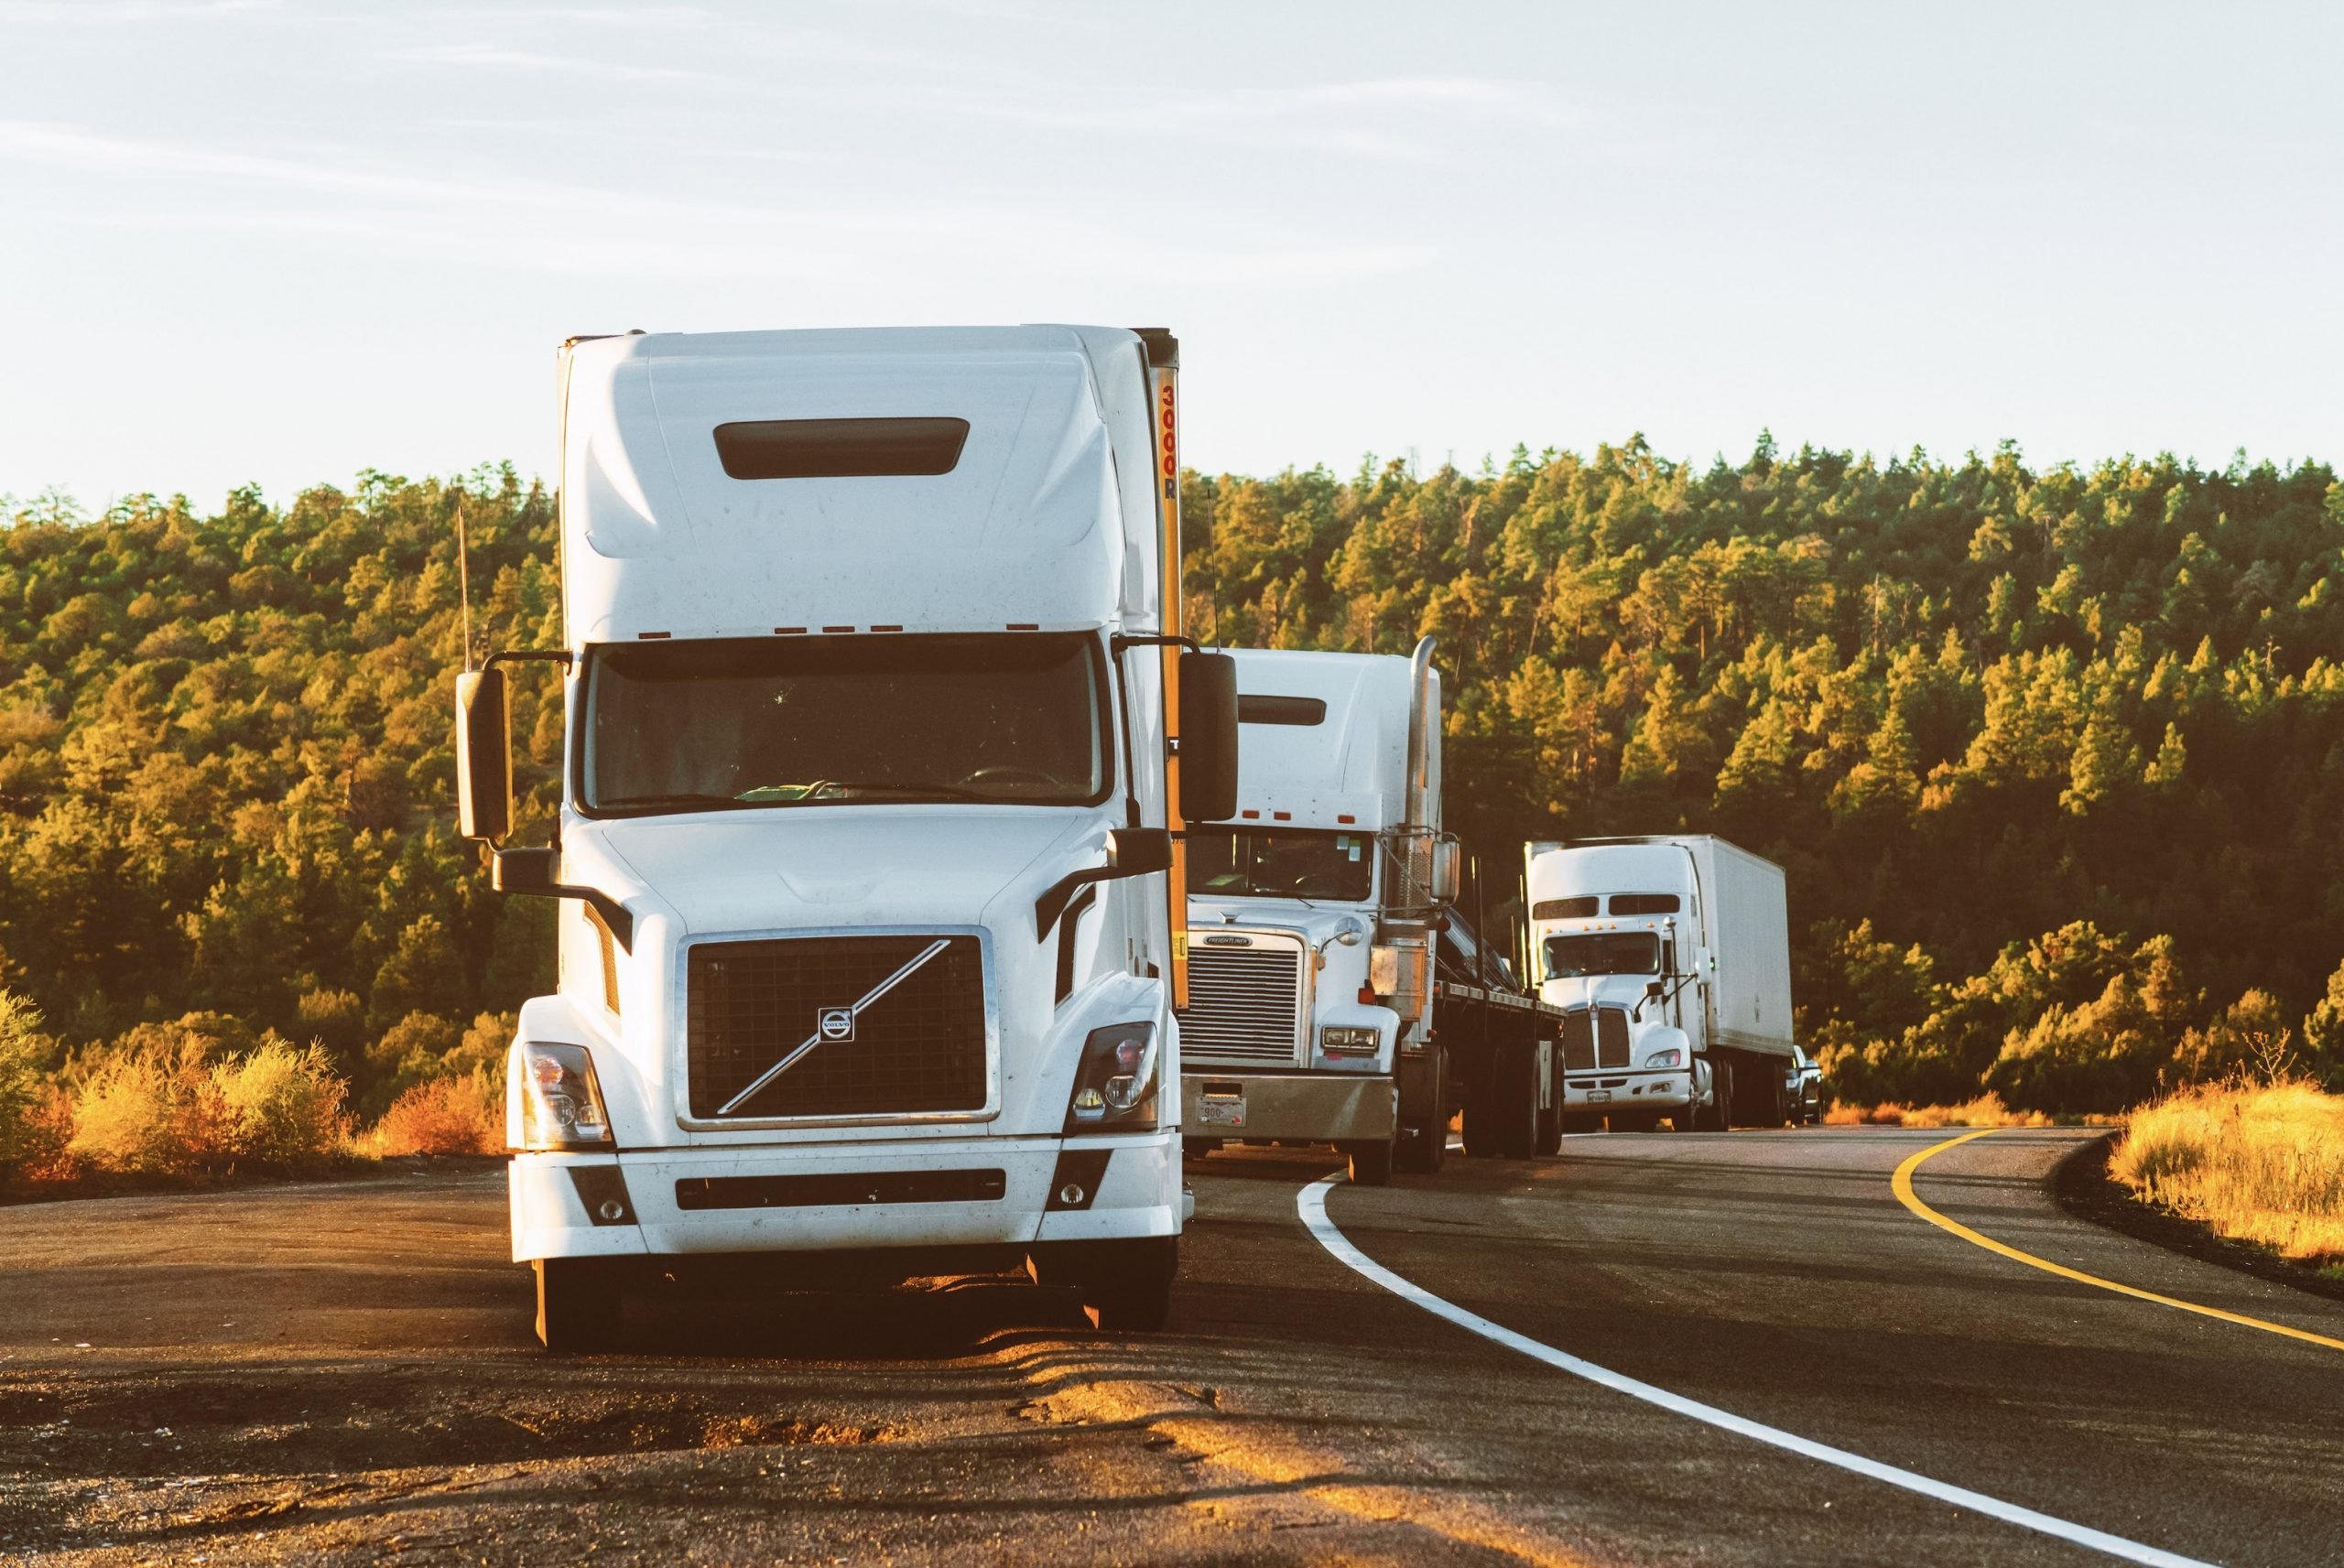 Vehicle Tracking: How Will It Benefit Your Fleet?